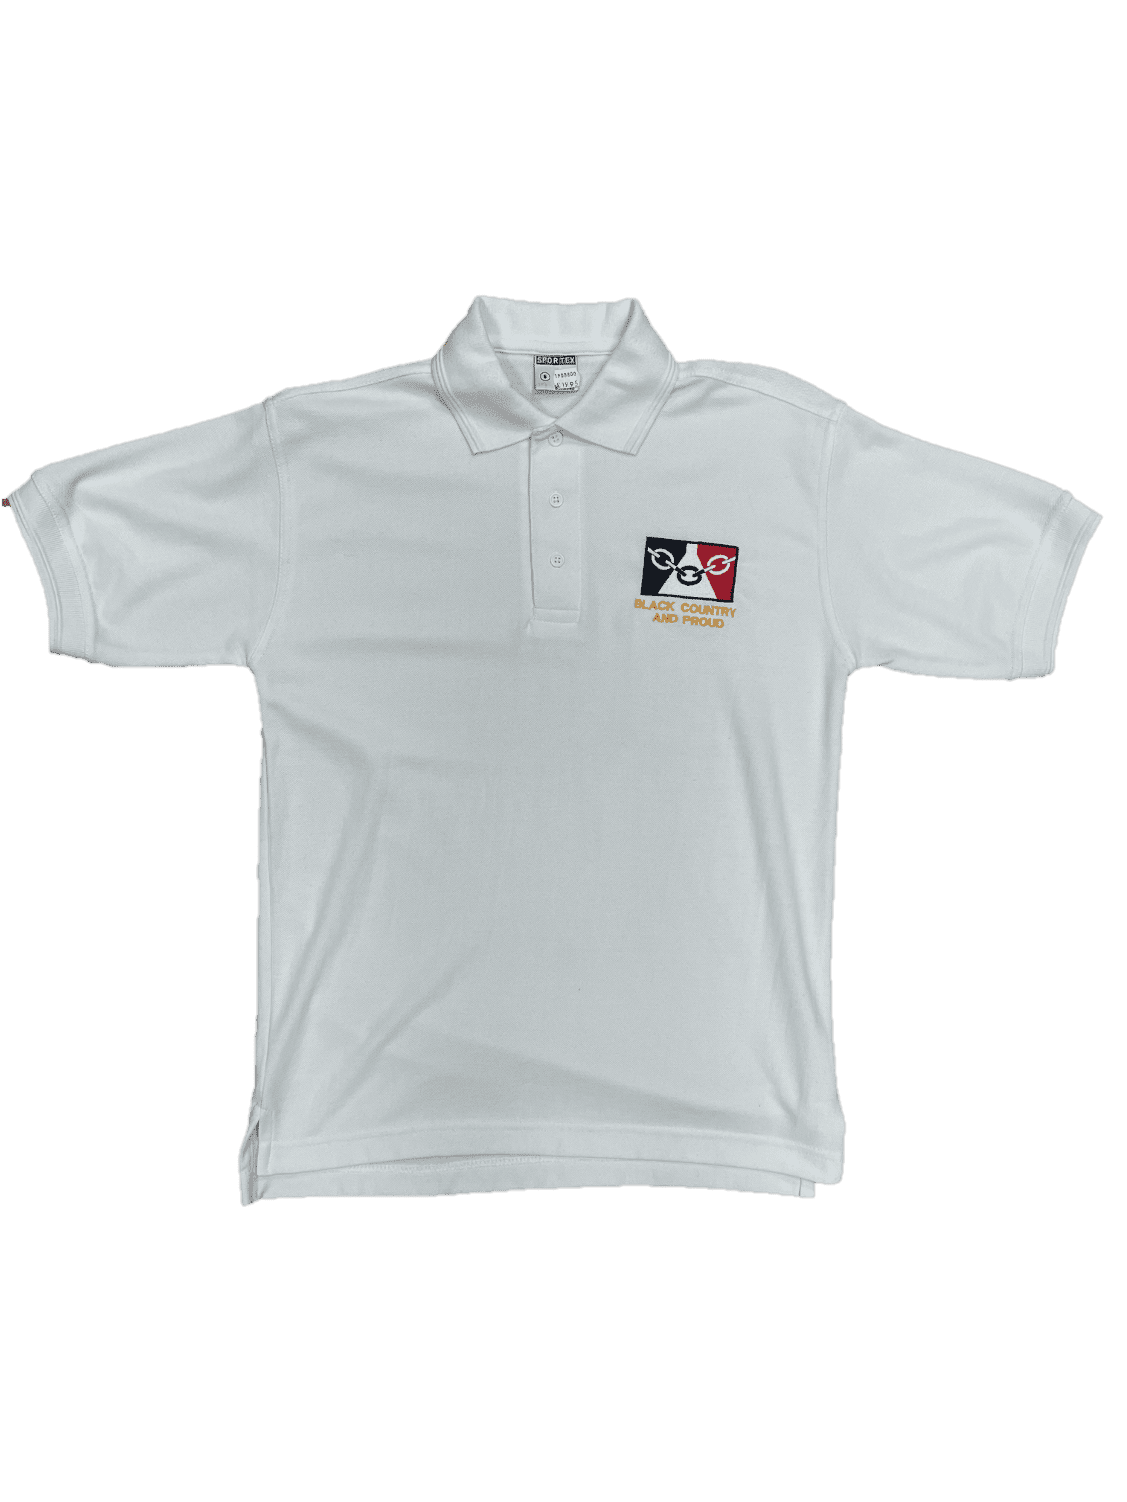 'Black Country and Proud' Polo Shirt (Unisex) - White - DANCERS